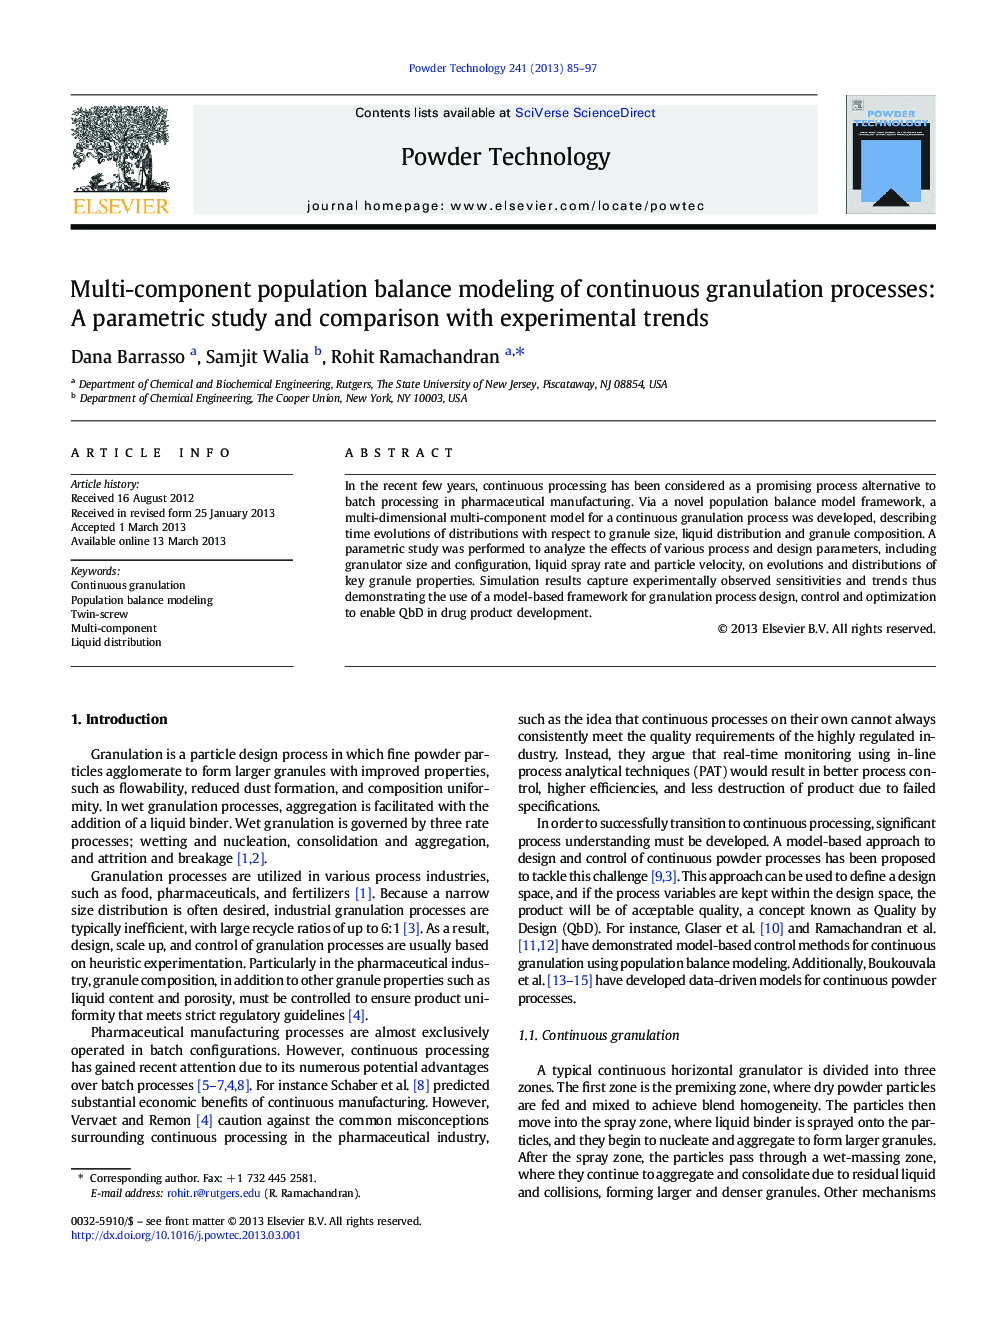 Multi-component population balance modeling of continuous granulation processes: A parametric study and comparison with experimental trends